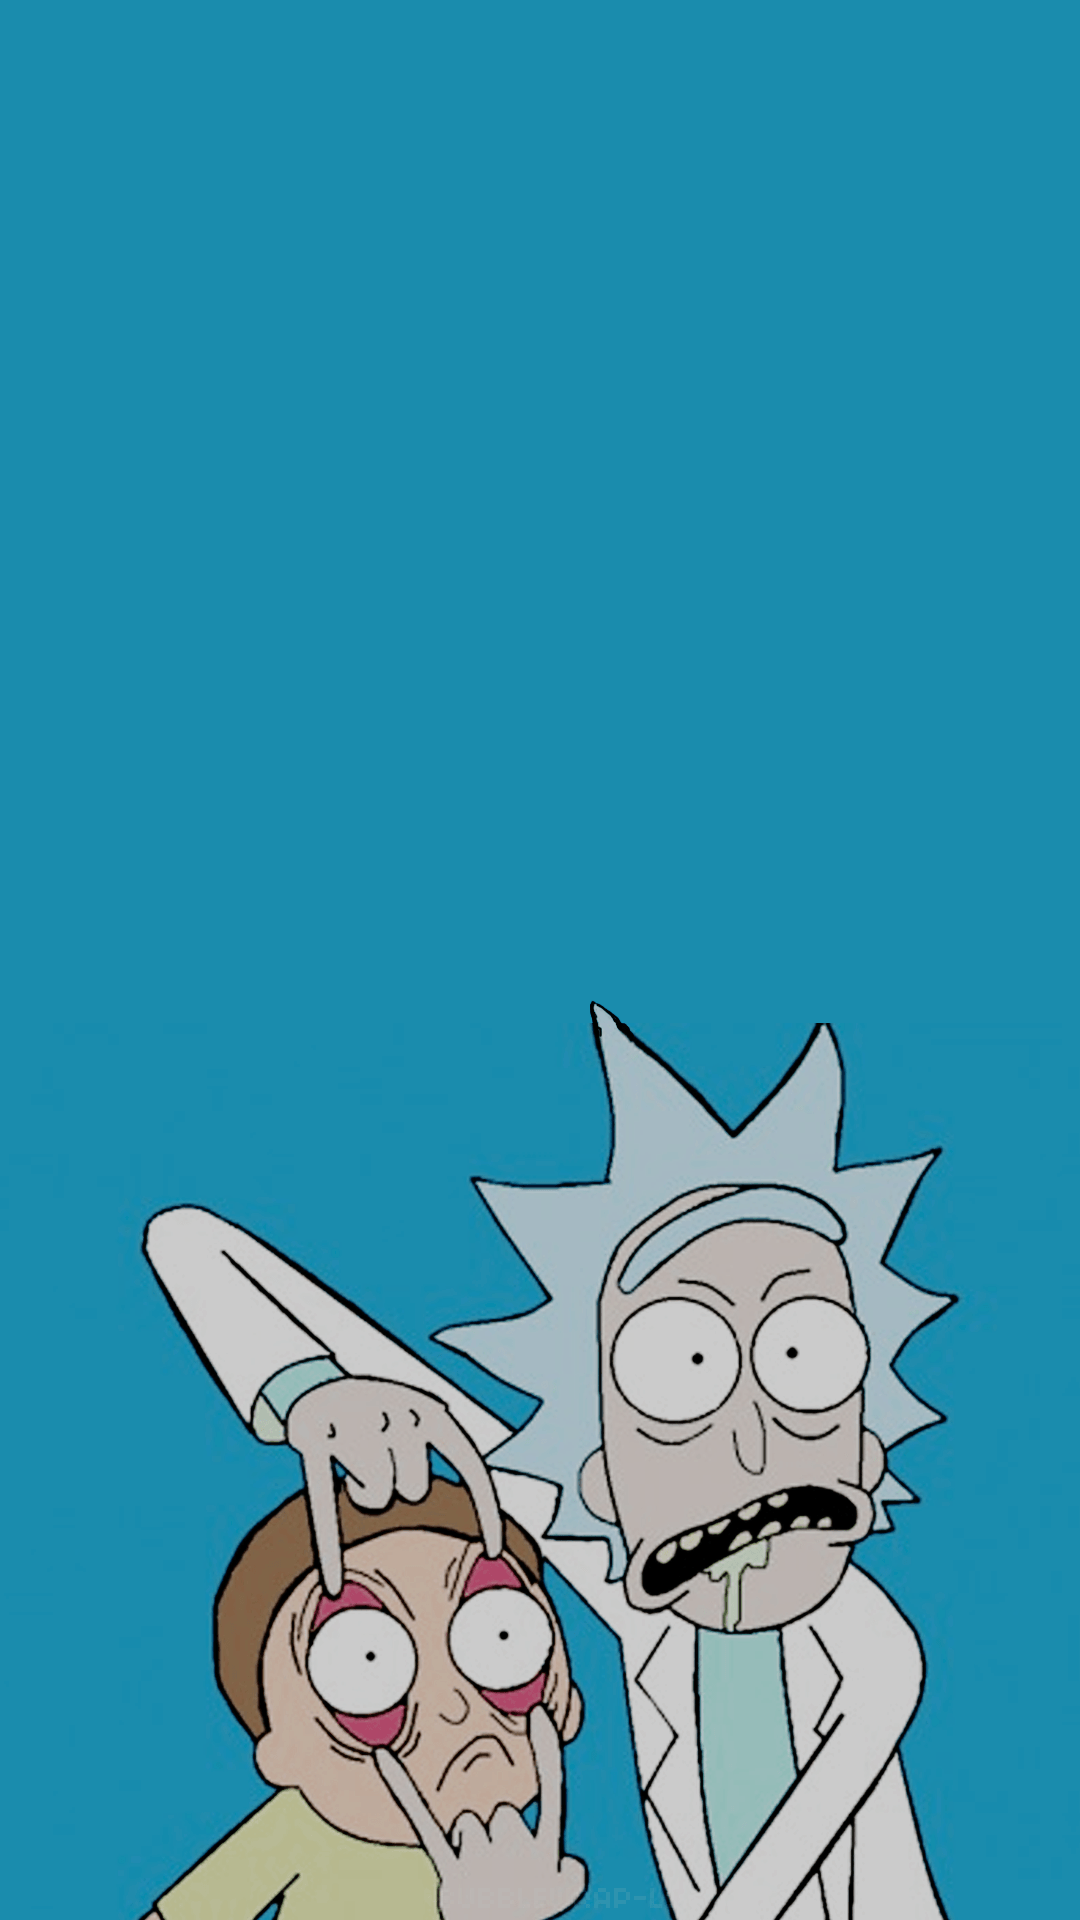 A cartoon of rick and morty - Rick and Morty